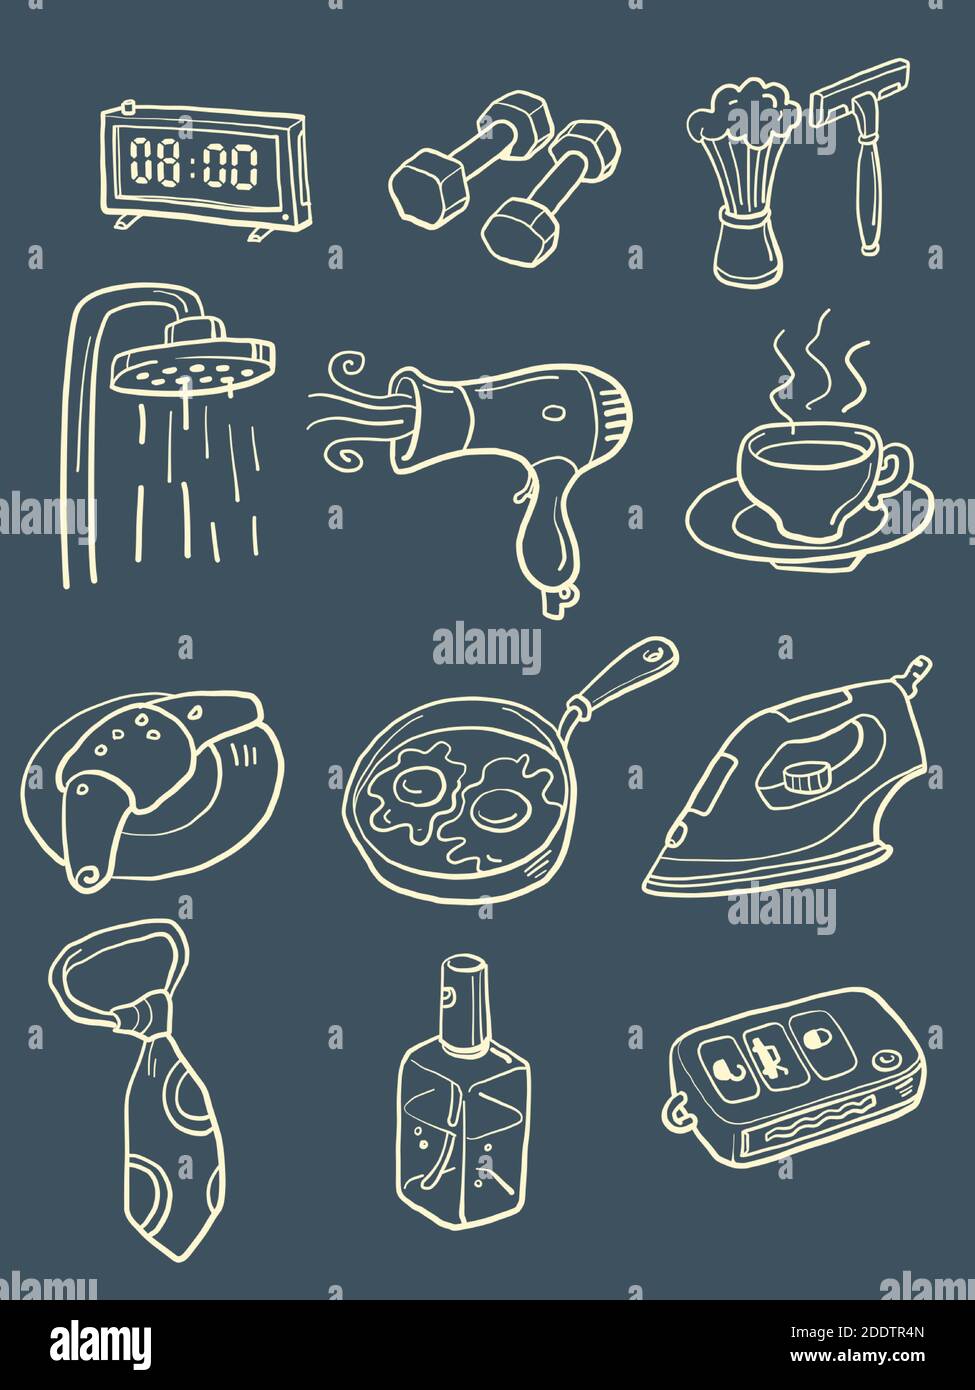 collection set icons symbols sketch hand drawing Stock Vector